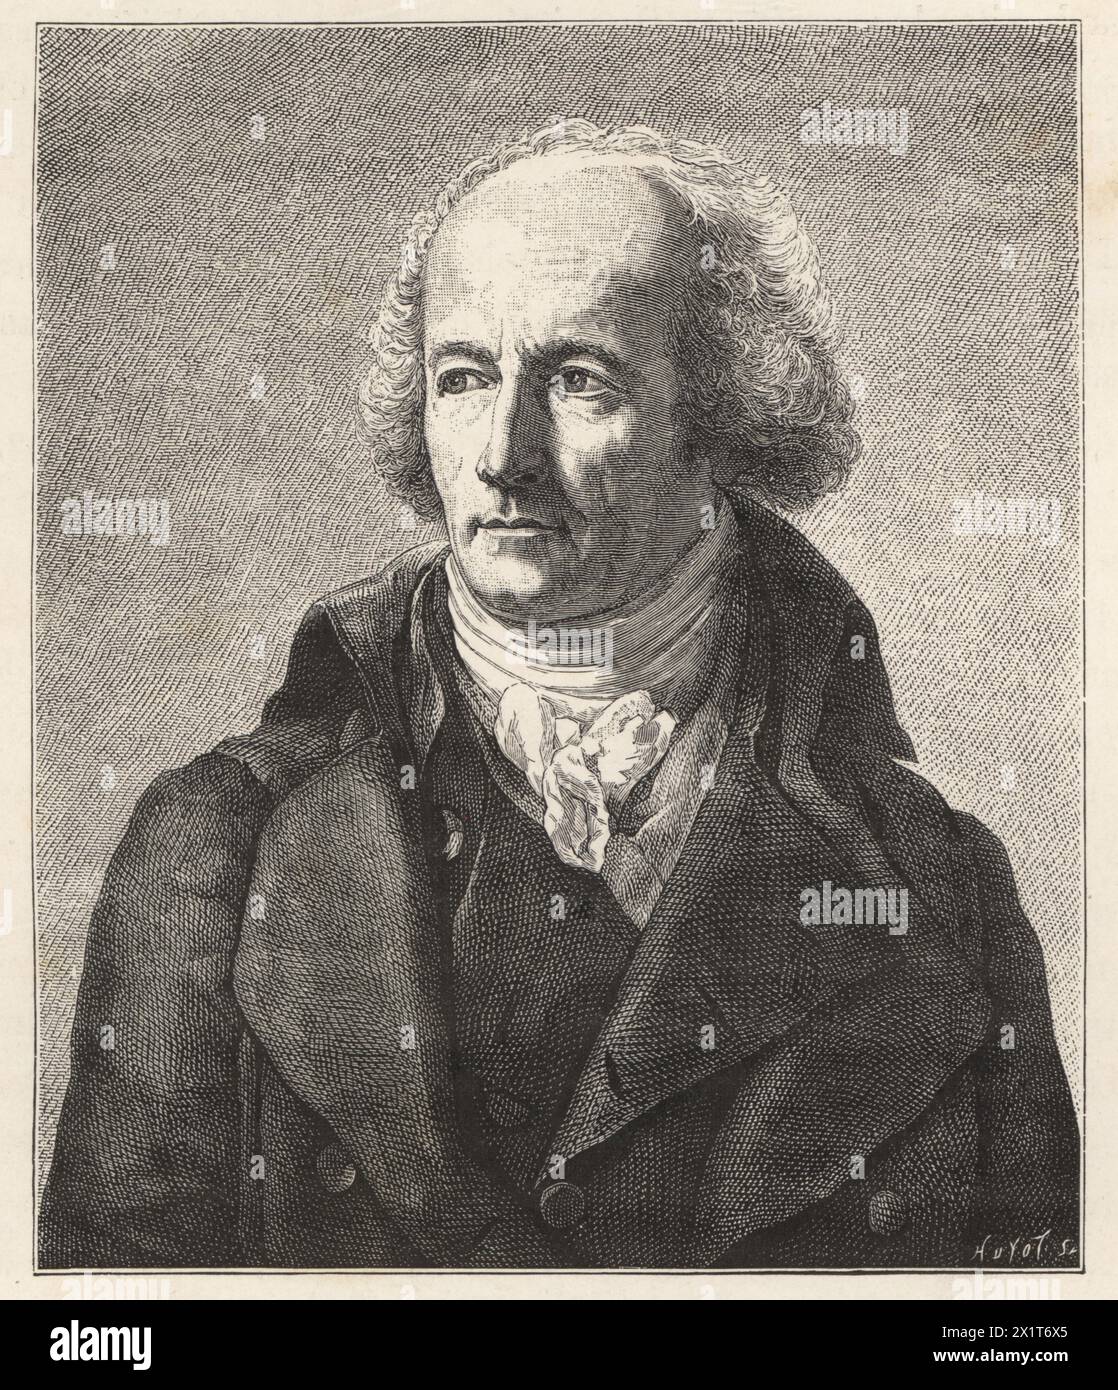 Alexandre-Théodore Brongniart, French architect, 1739-1813. Woodcut by Huyot after the portrait by Arnoult (sic), probably François Gérard. Illustration from Paul Lacroix's Directoire, Consulat et Empire, (Directory, Consulate and Empire), Paris, 1884. Stock Photo